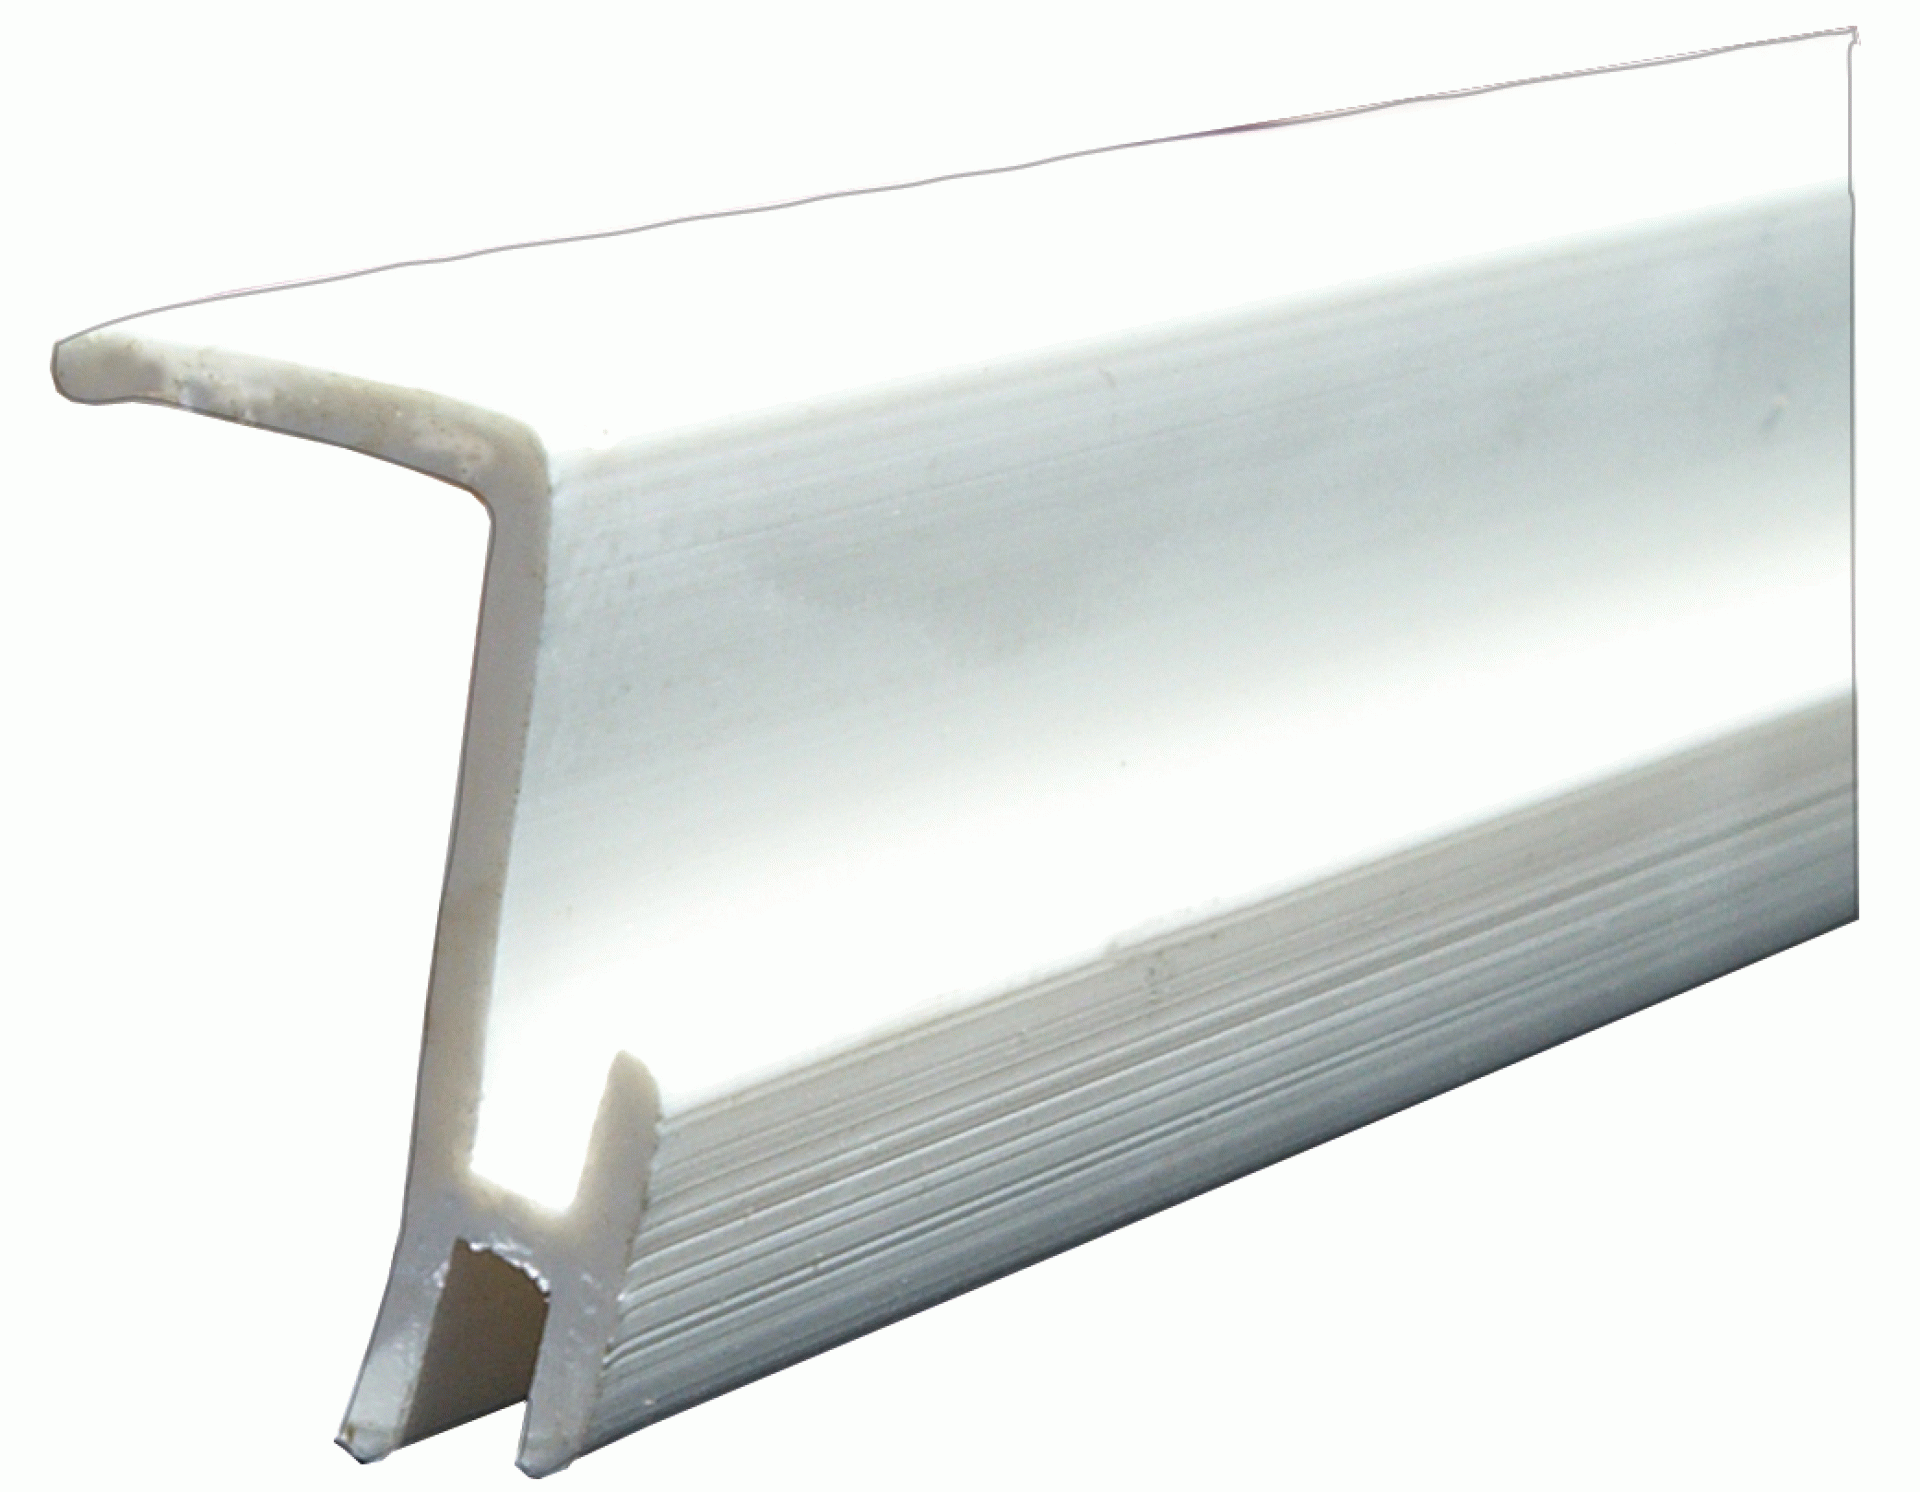 J R PRODUCTS | 80371 | TRACK CEILING FOR 96" WHITE TRACK FOR 1/2" SLIDE TAPE TYPE "D"